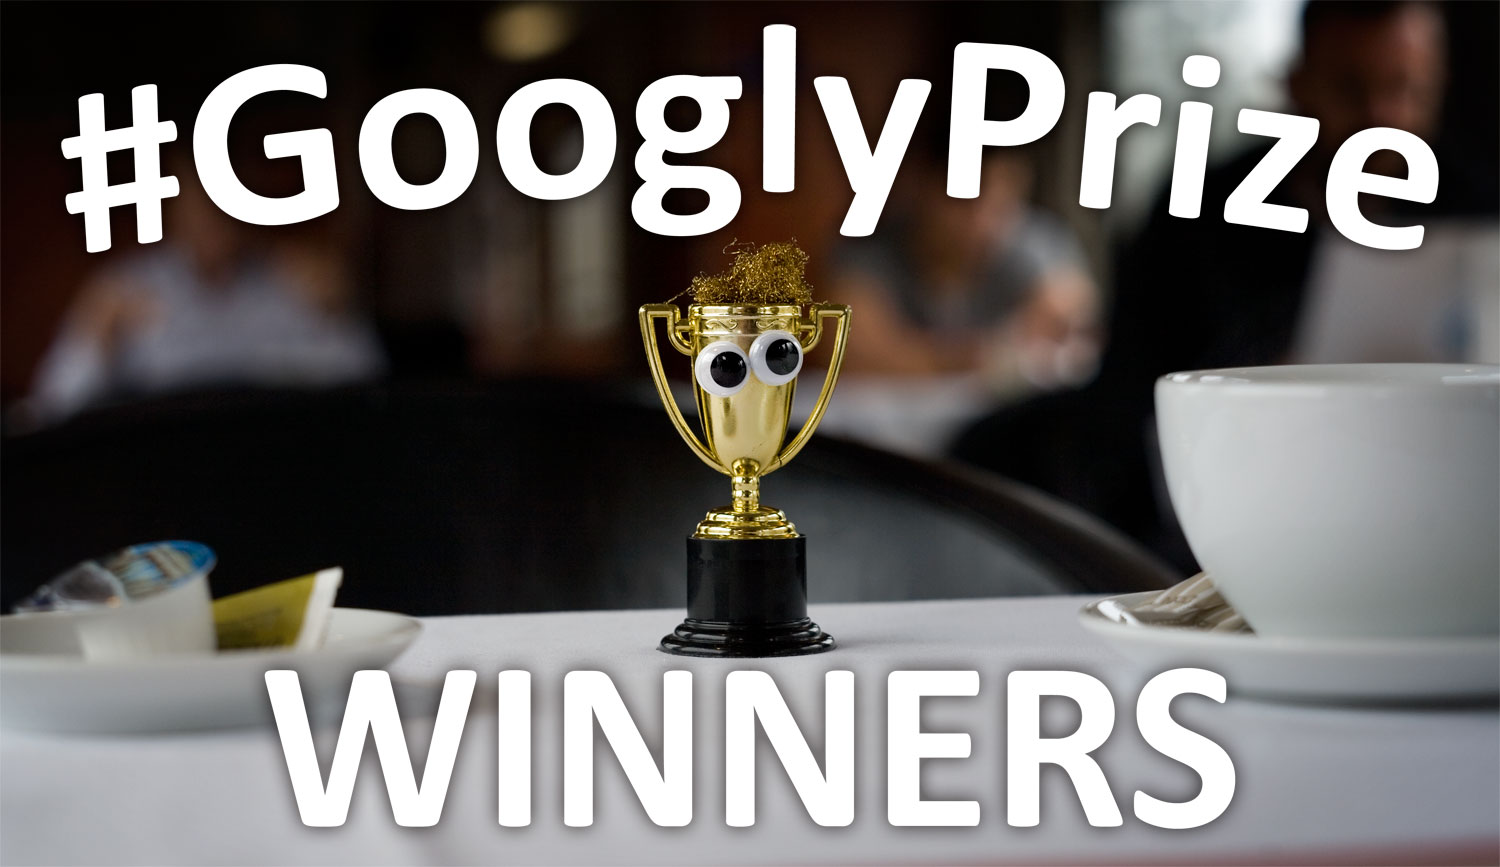 Googly Prize Winners Issue 39